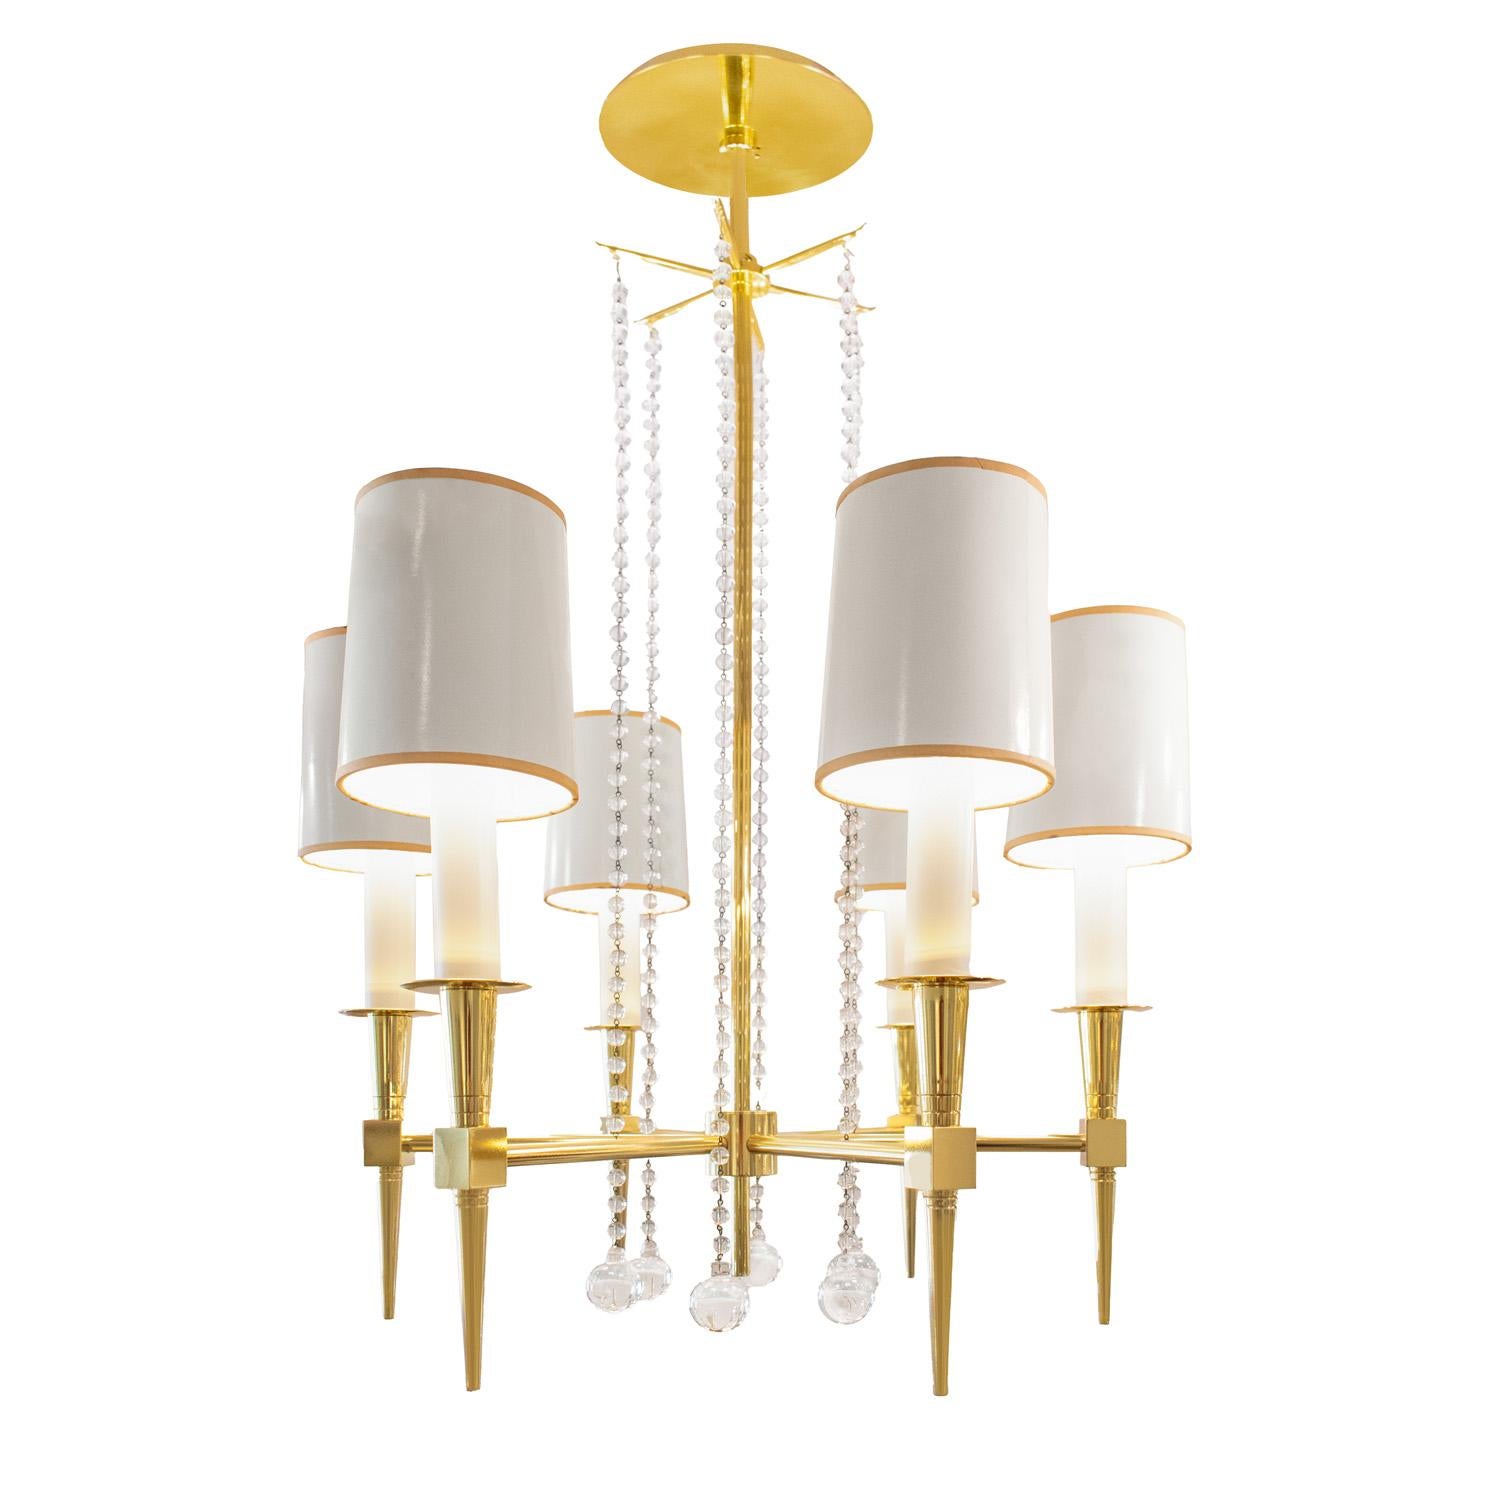 Beautifully crafted 6 arm chandelier model no 1 in brass with suspended crystal beads by Tommi Parzinger for Parzinger Originals, American 1950's. Includes original shades. Brass has been professionally polished and lacquered.  Newly rewired.  This